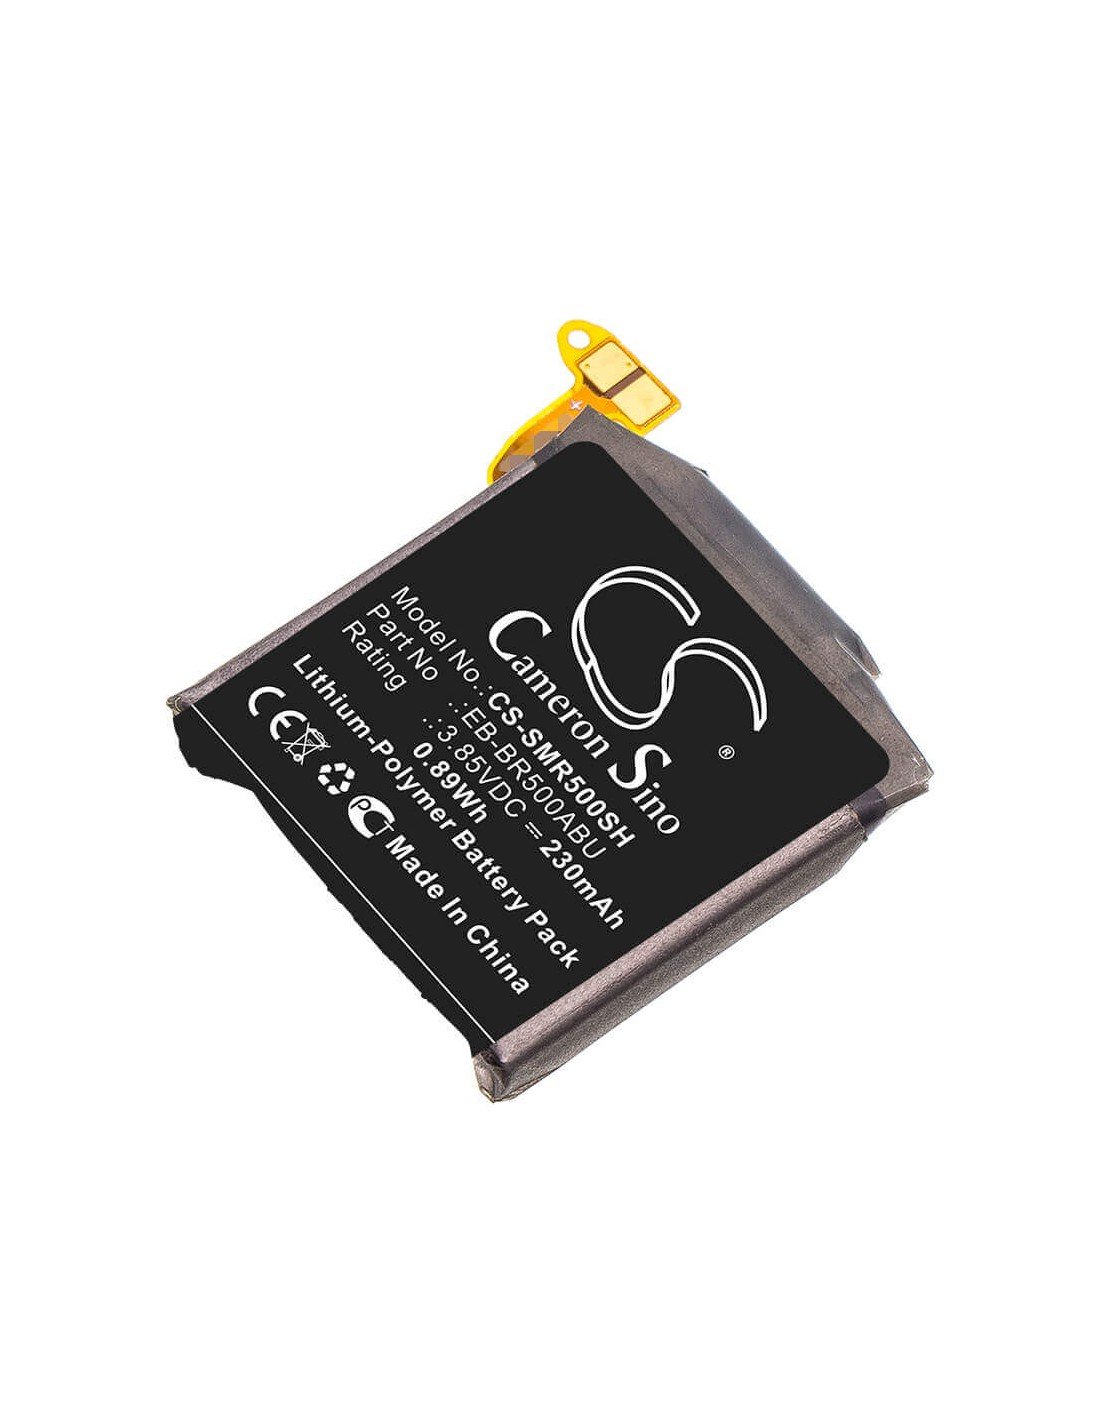 Battery for Samsung, Galaxy Watch Active, Sm-r500, Sm-r500n 3.85V, 230mAh - 0.89Wh